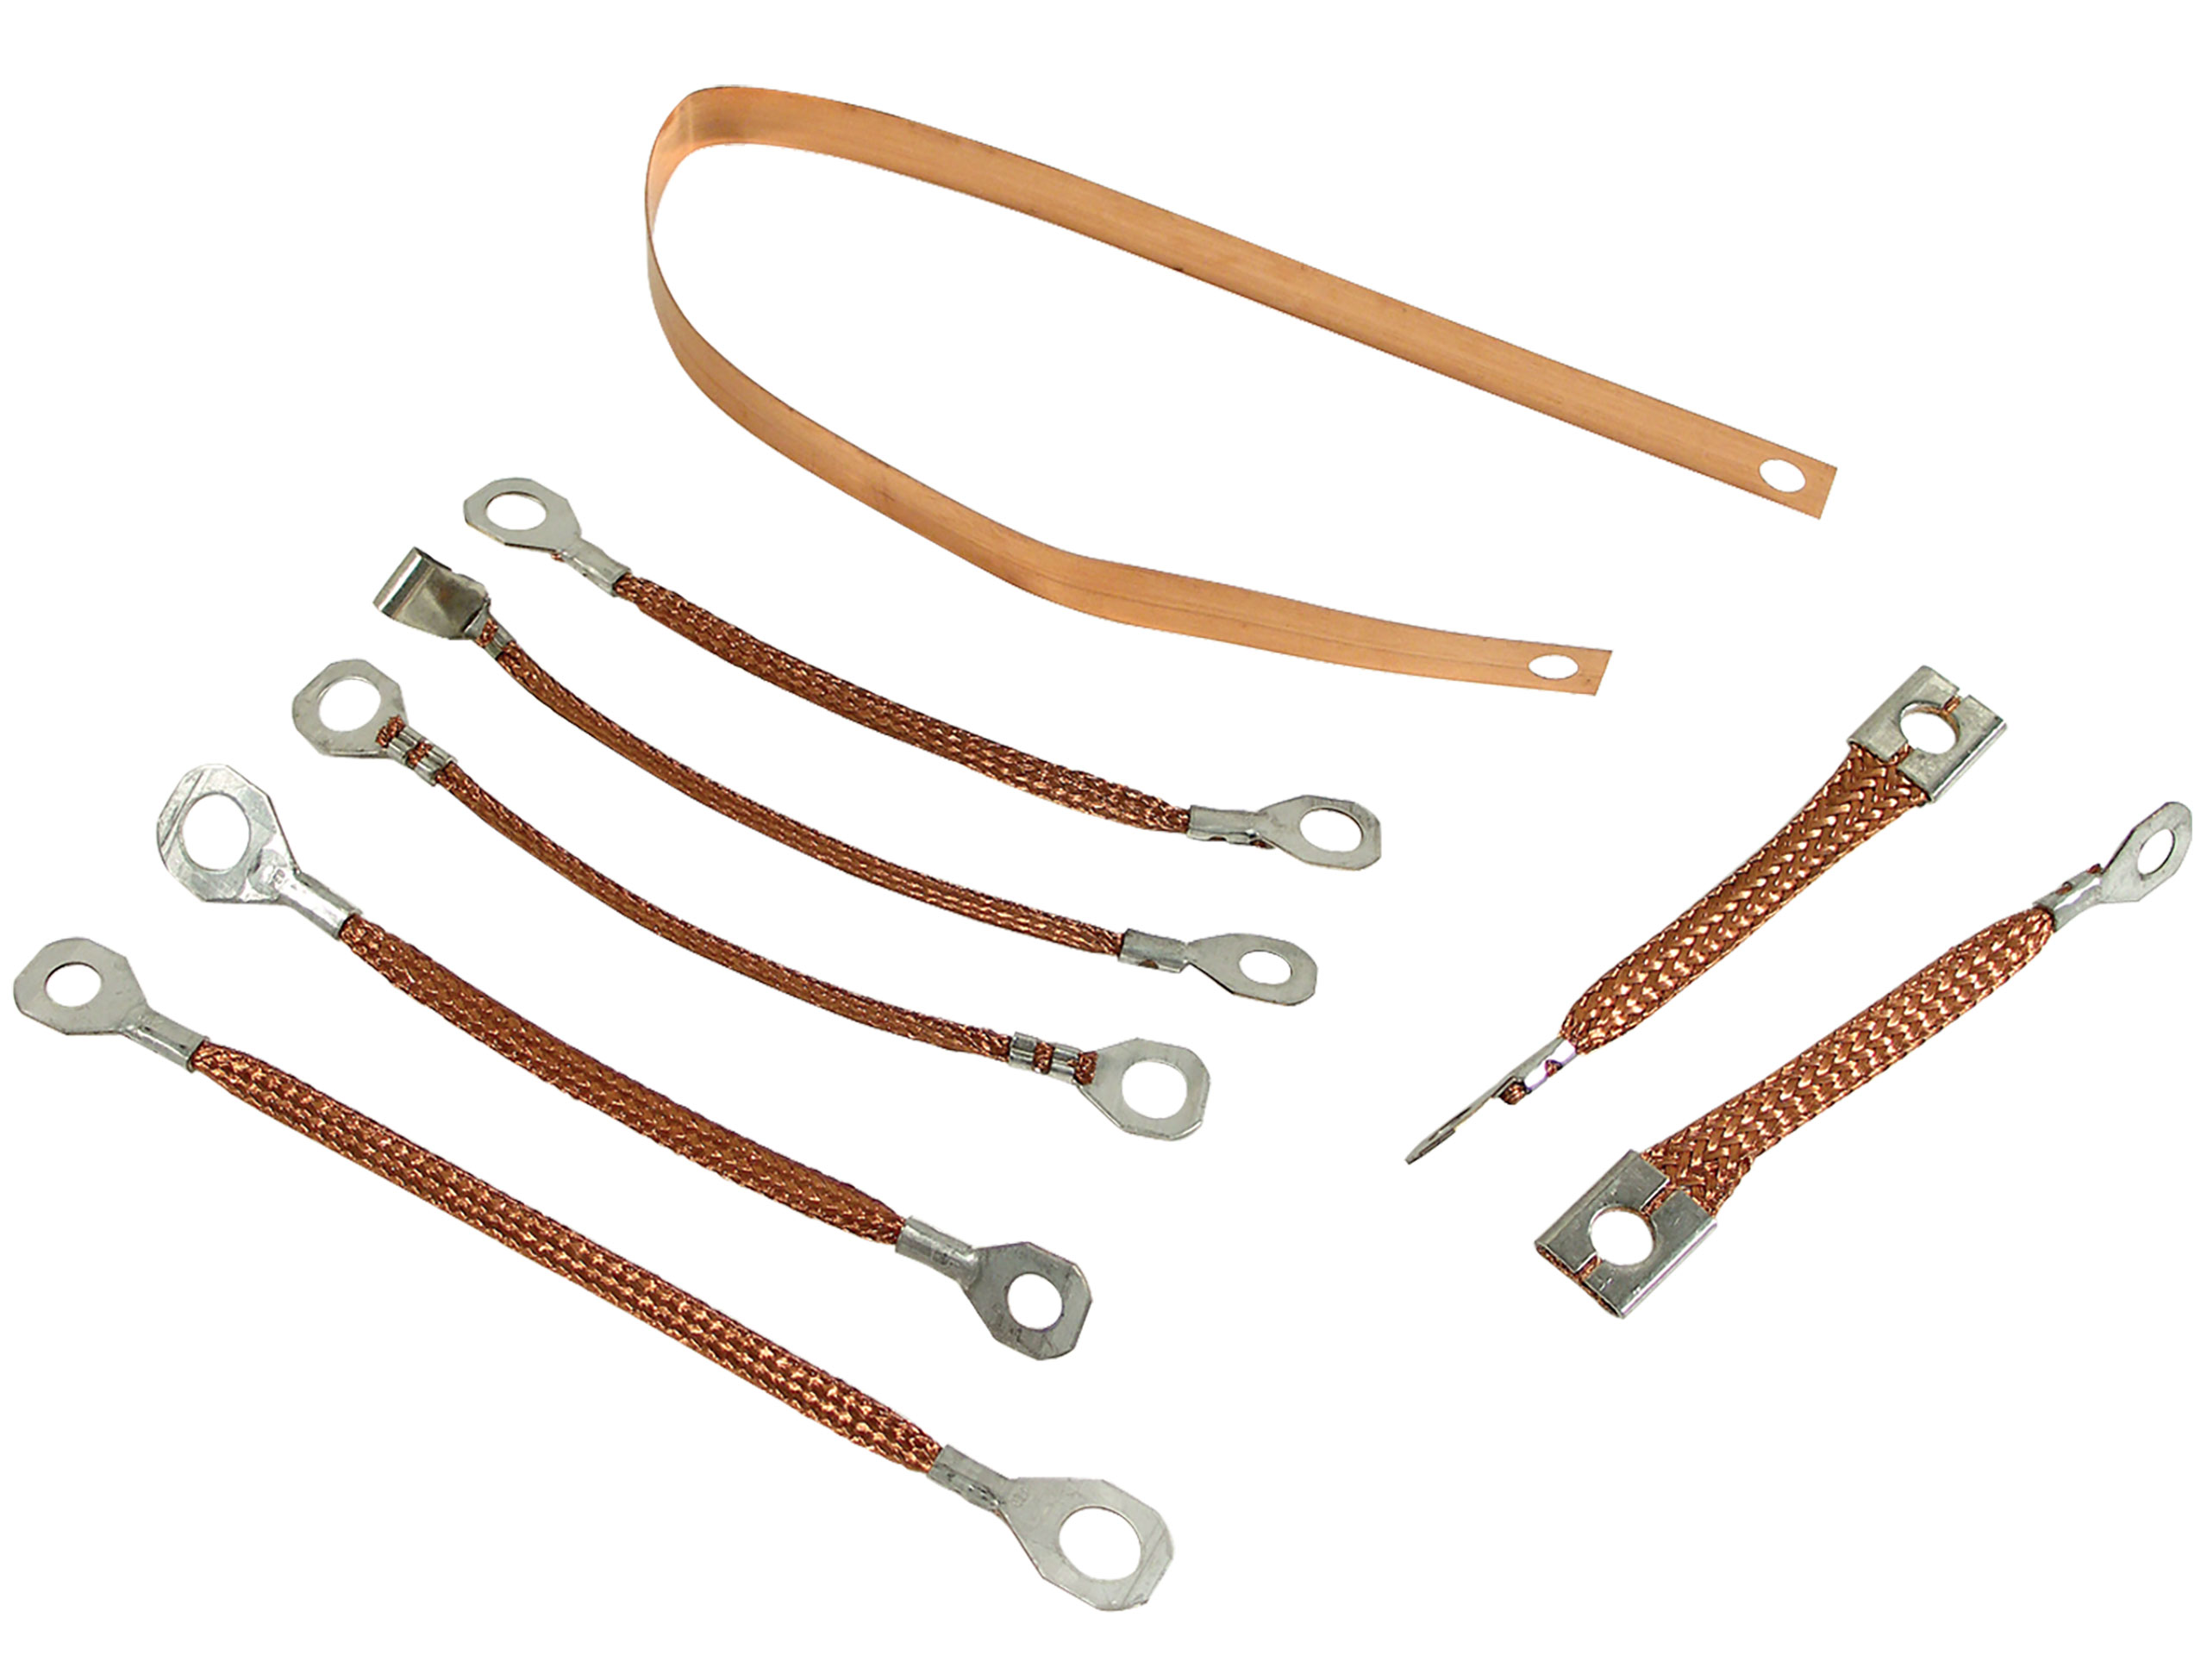 C2 1963 Chevrolet Corvette Ground Strap Kit. Standard Exhaust - Lectric Limited, Inc.